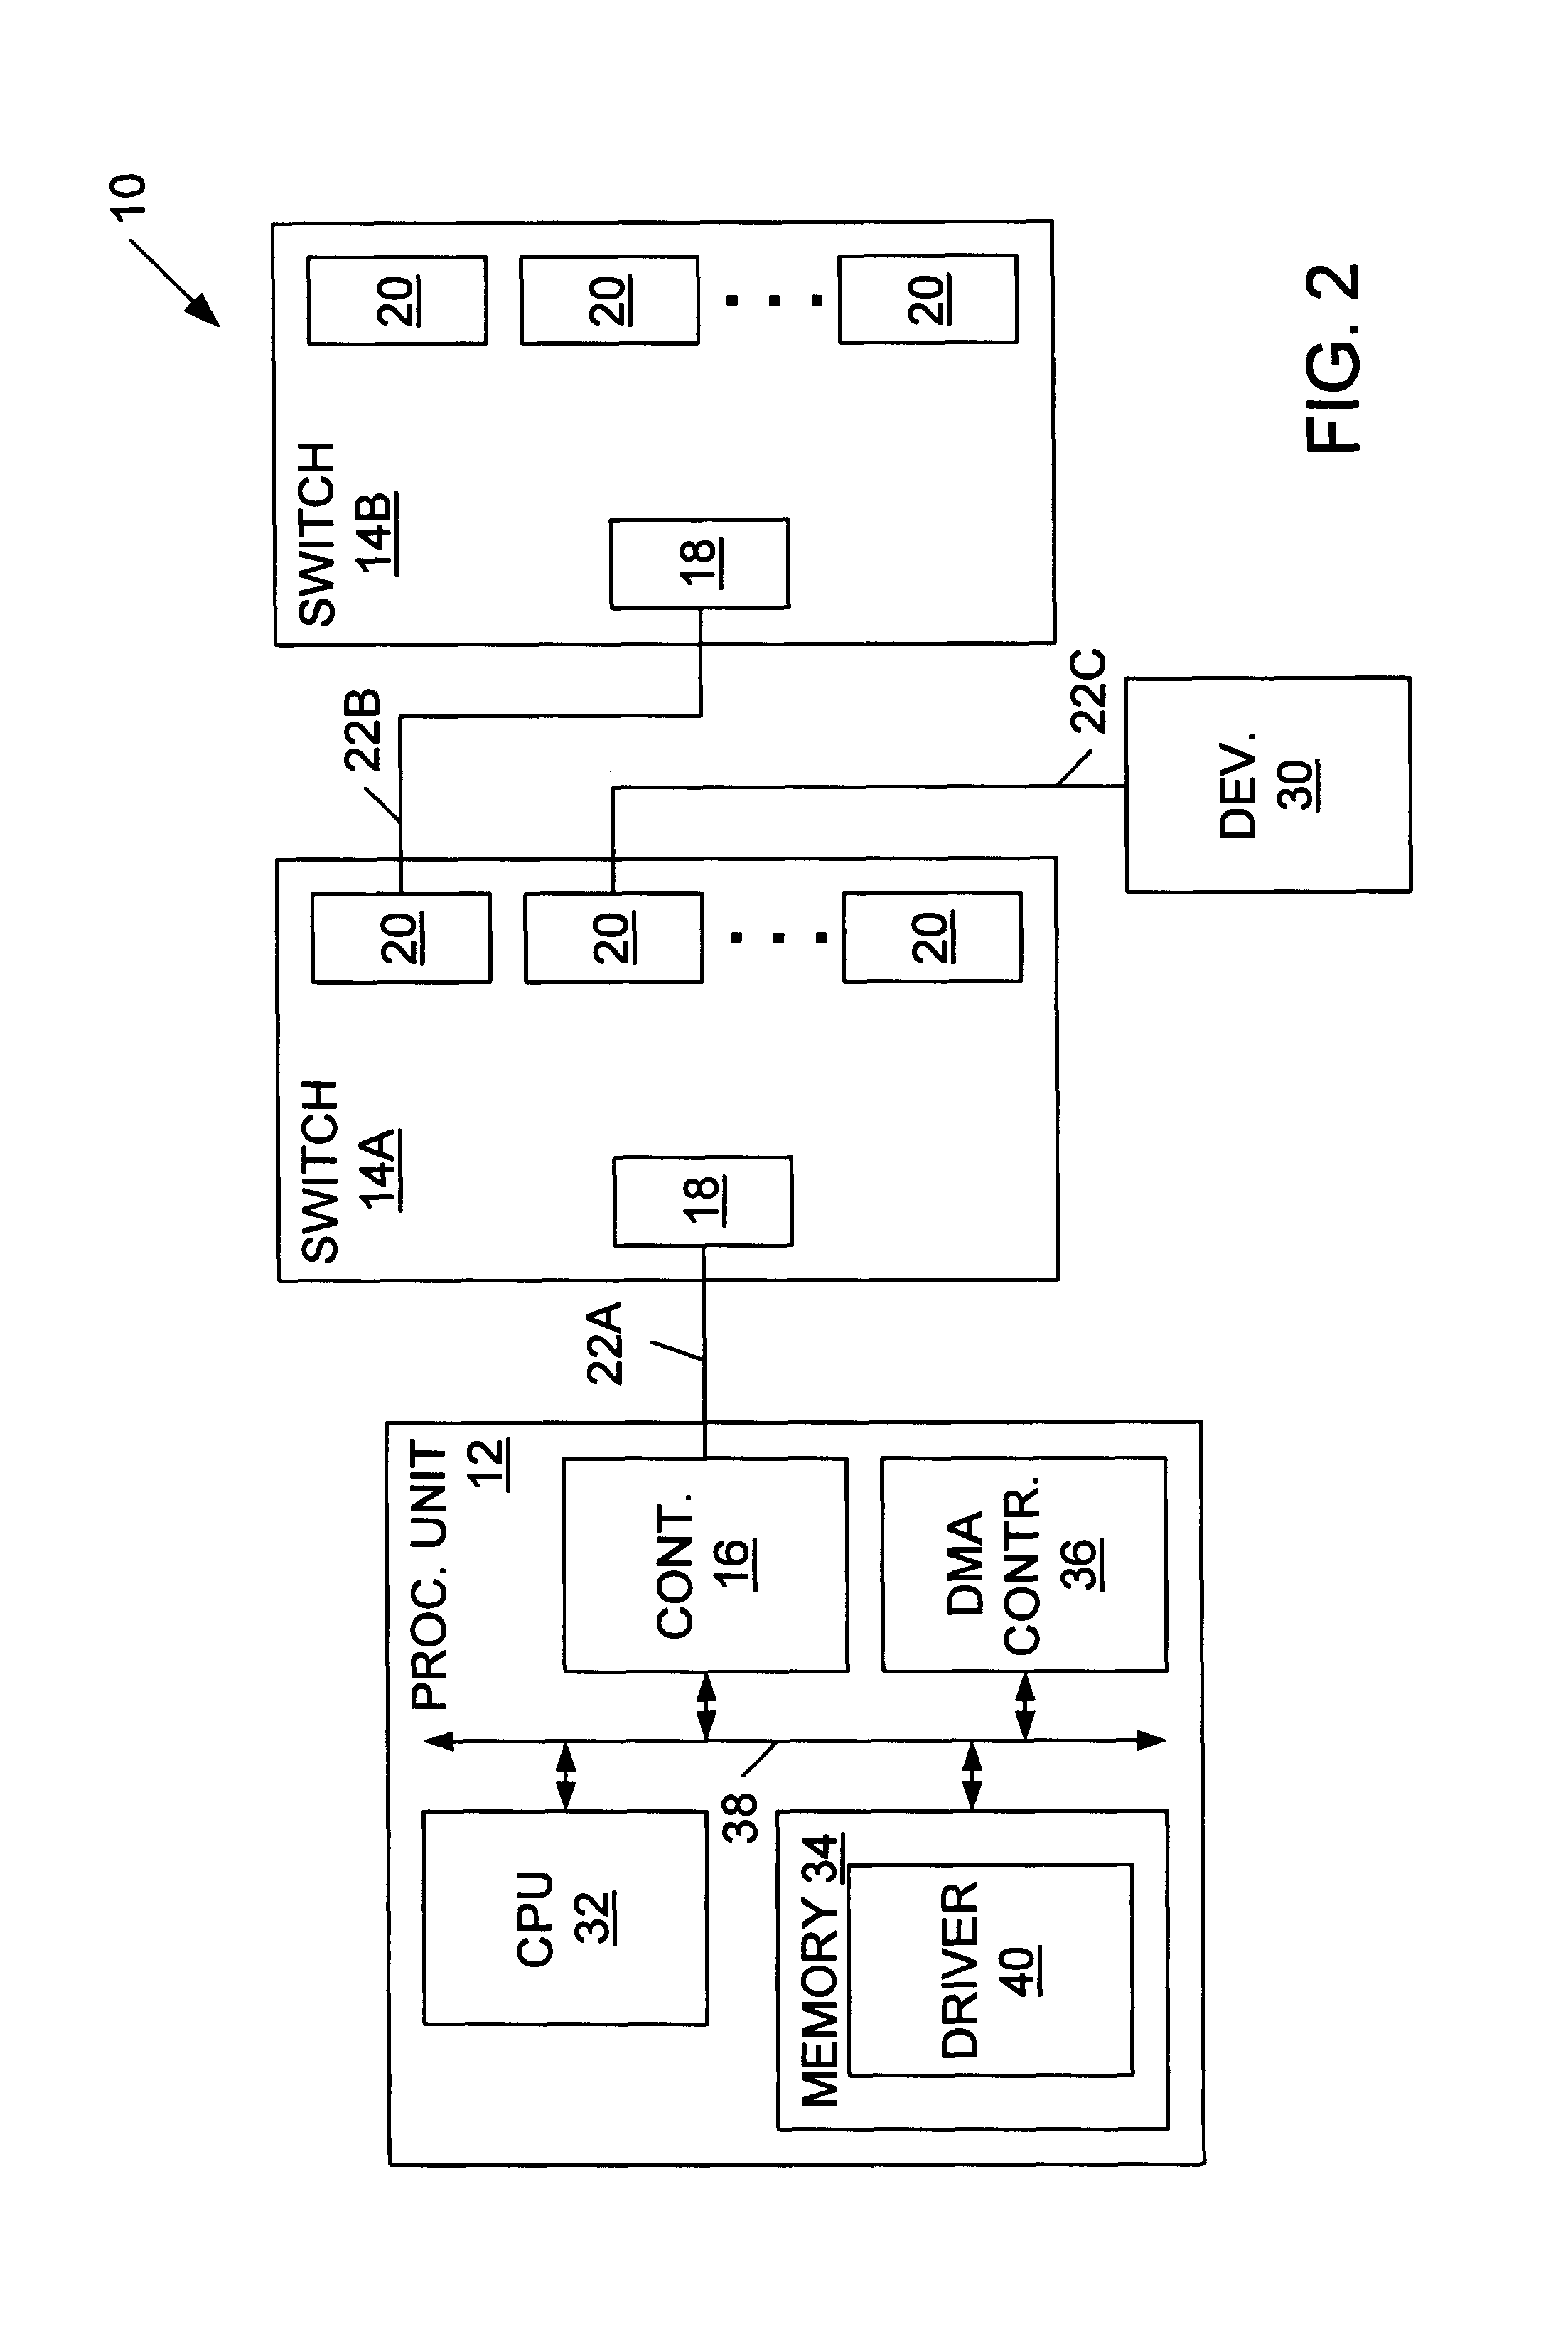 Data exchange methods for a switch which selectively forms a communication channel between a processing unit and multiple devices